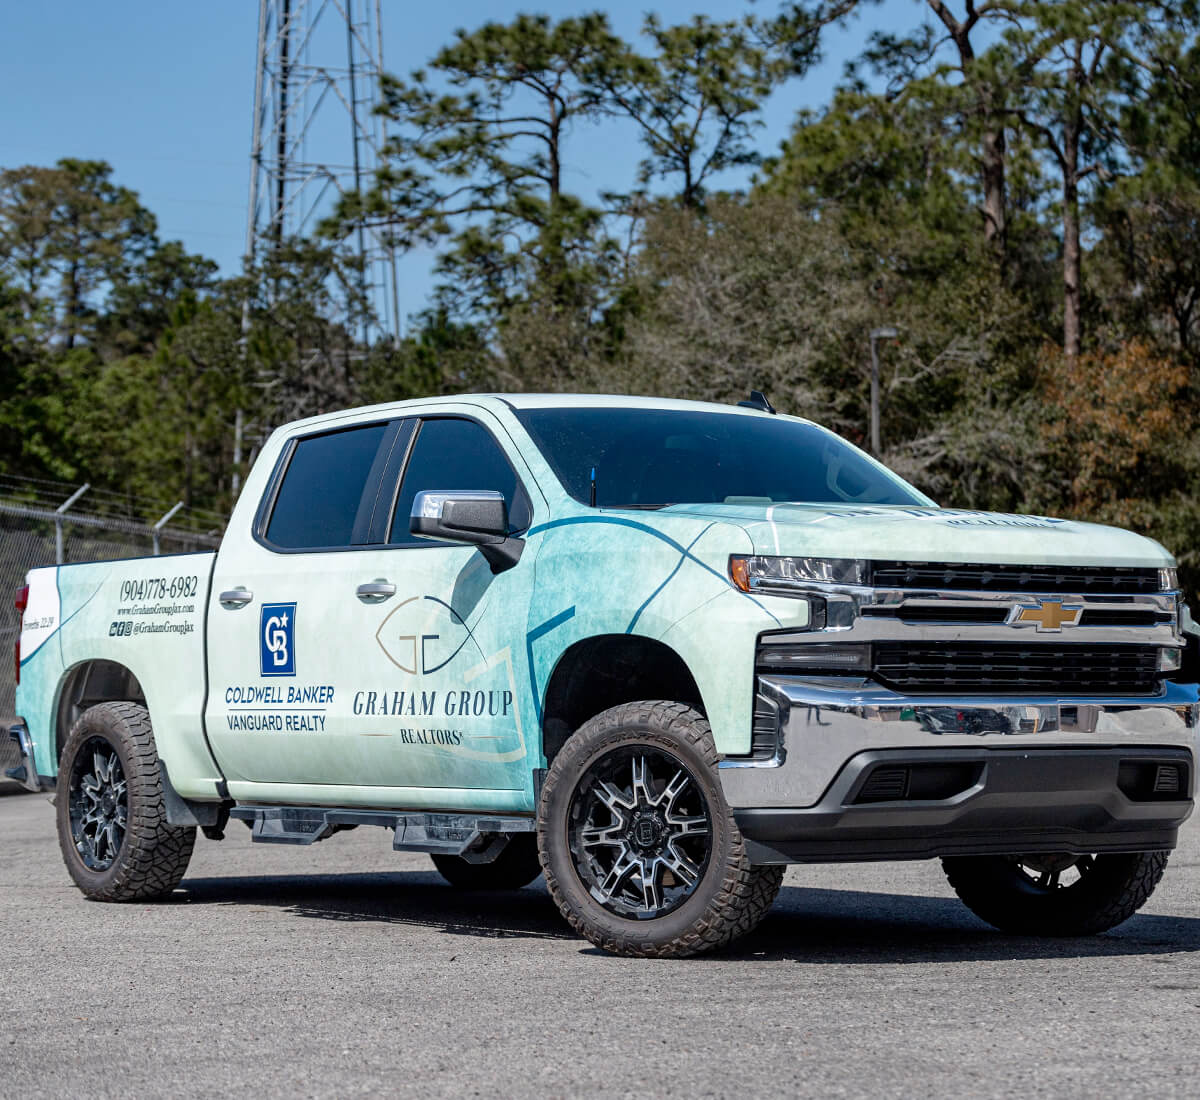 Chevy truck wrapped with white and blue business graphic